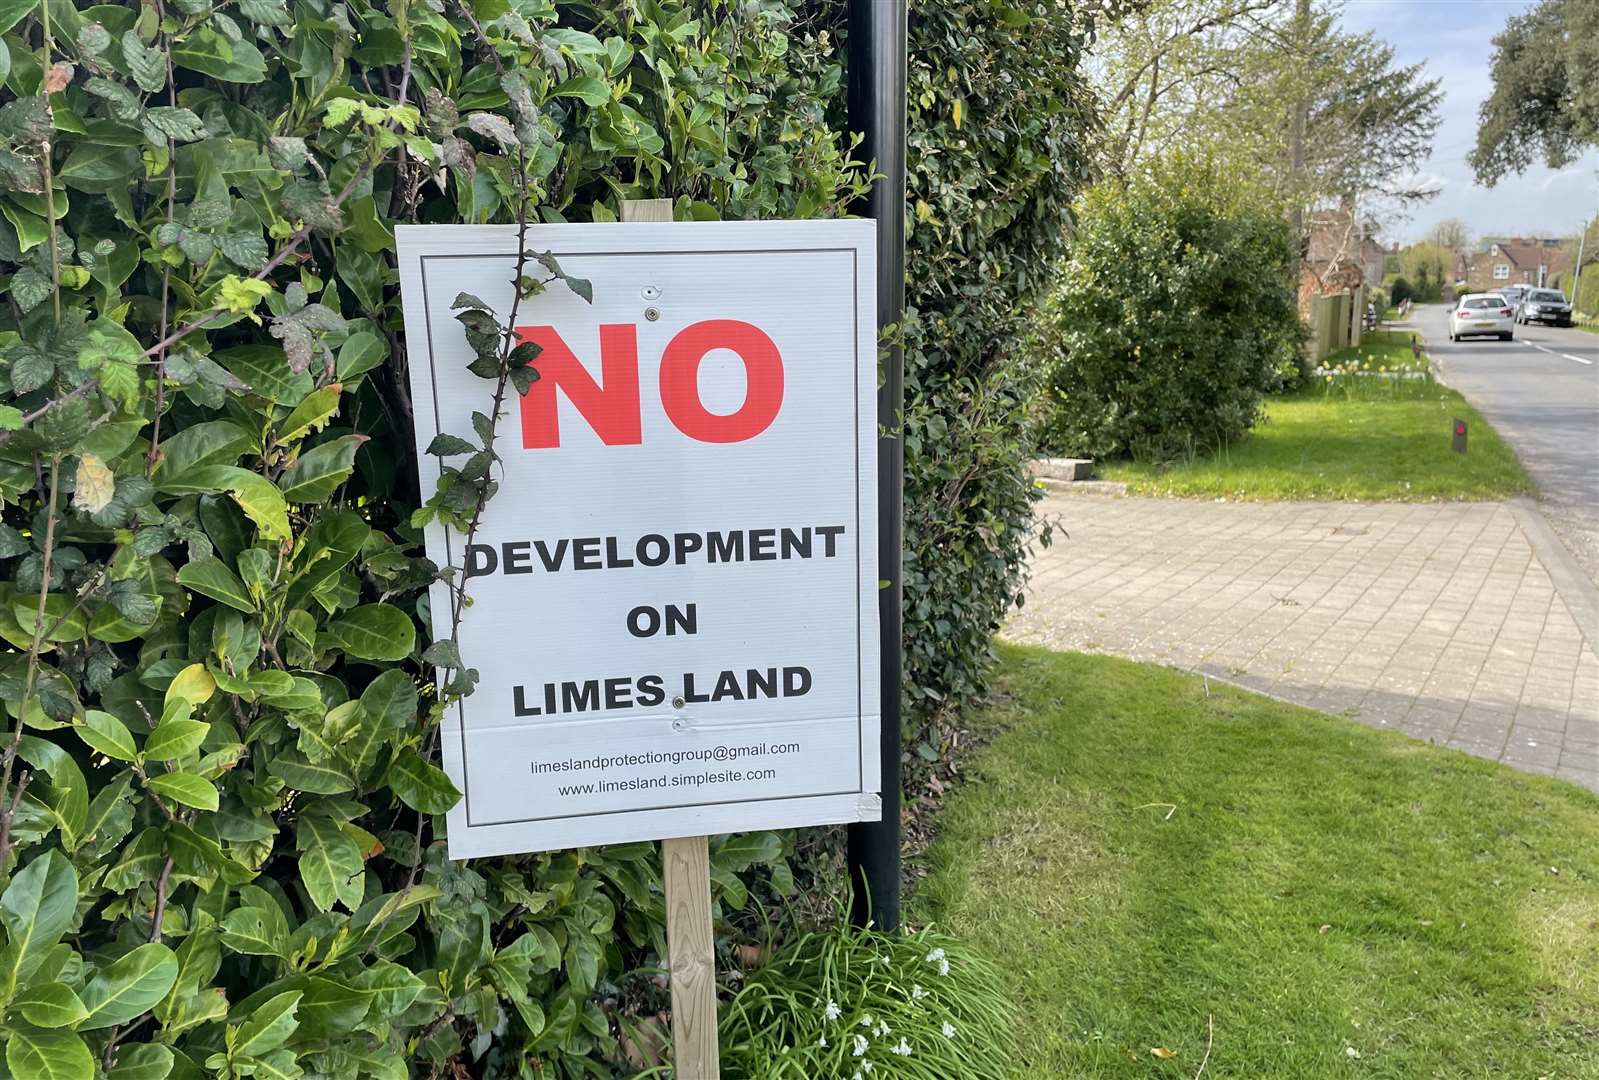 Residents have long been campaigning against the development